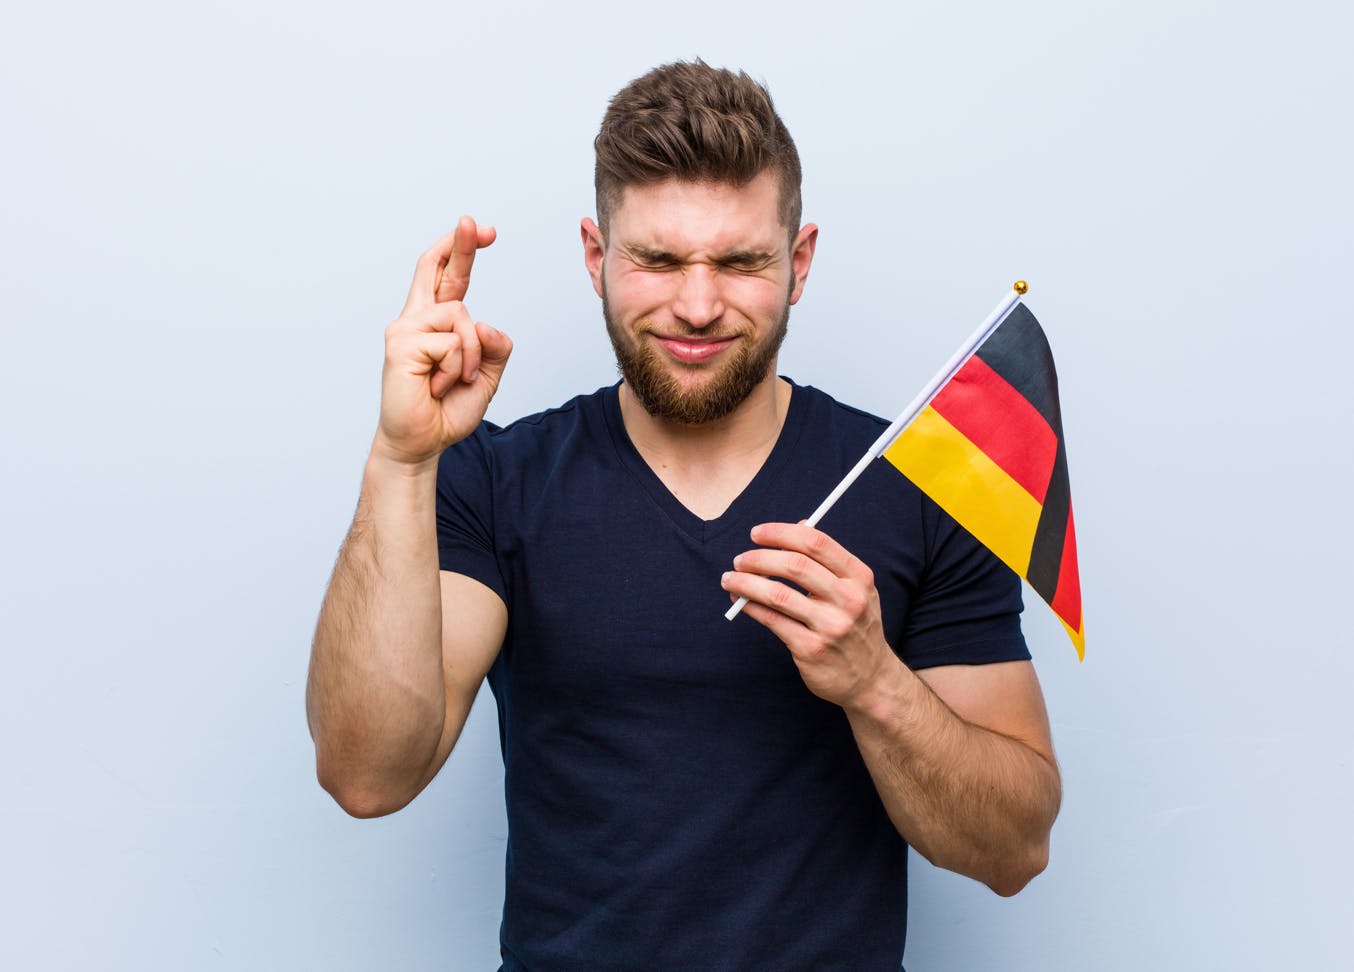 Man hoping to relocate to Germany via Chancenkarte crossing his fingers and holding German flag.